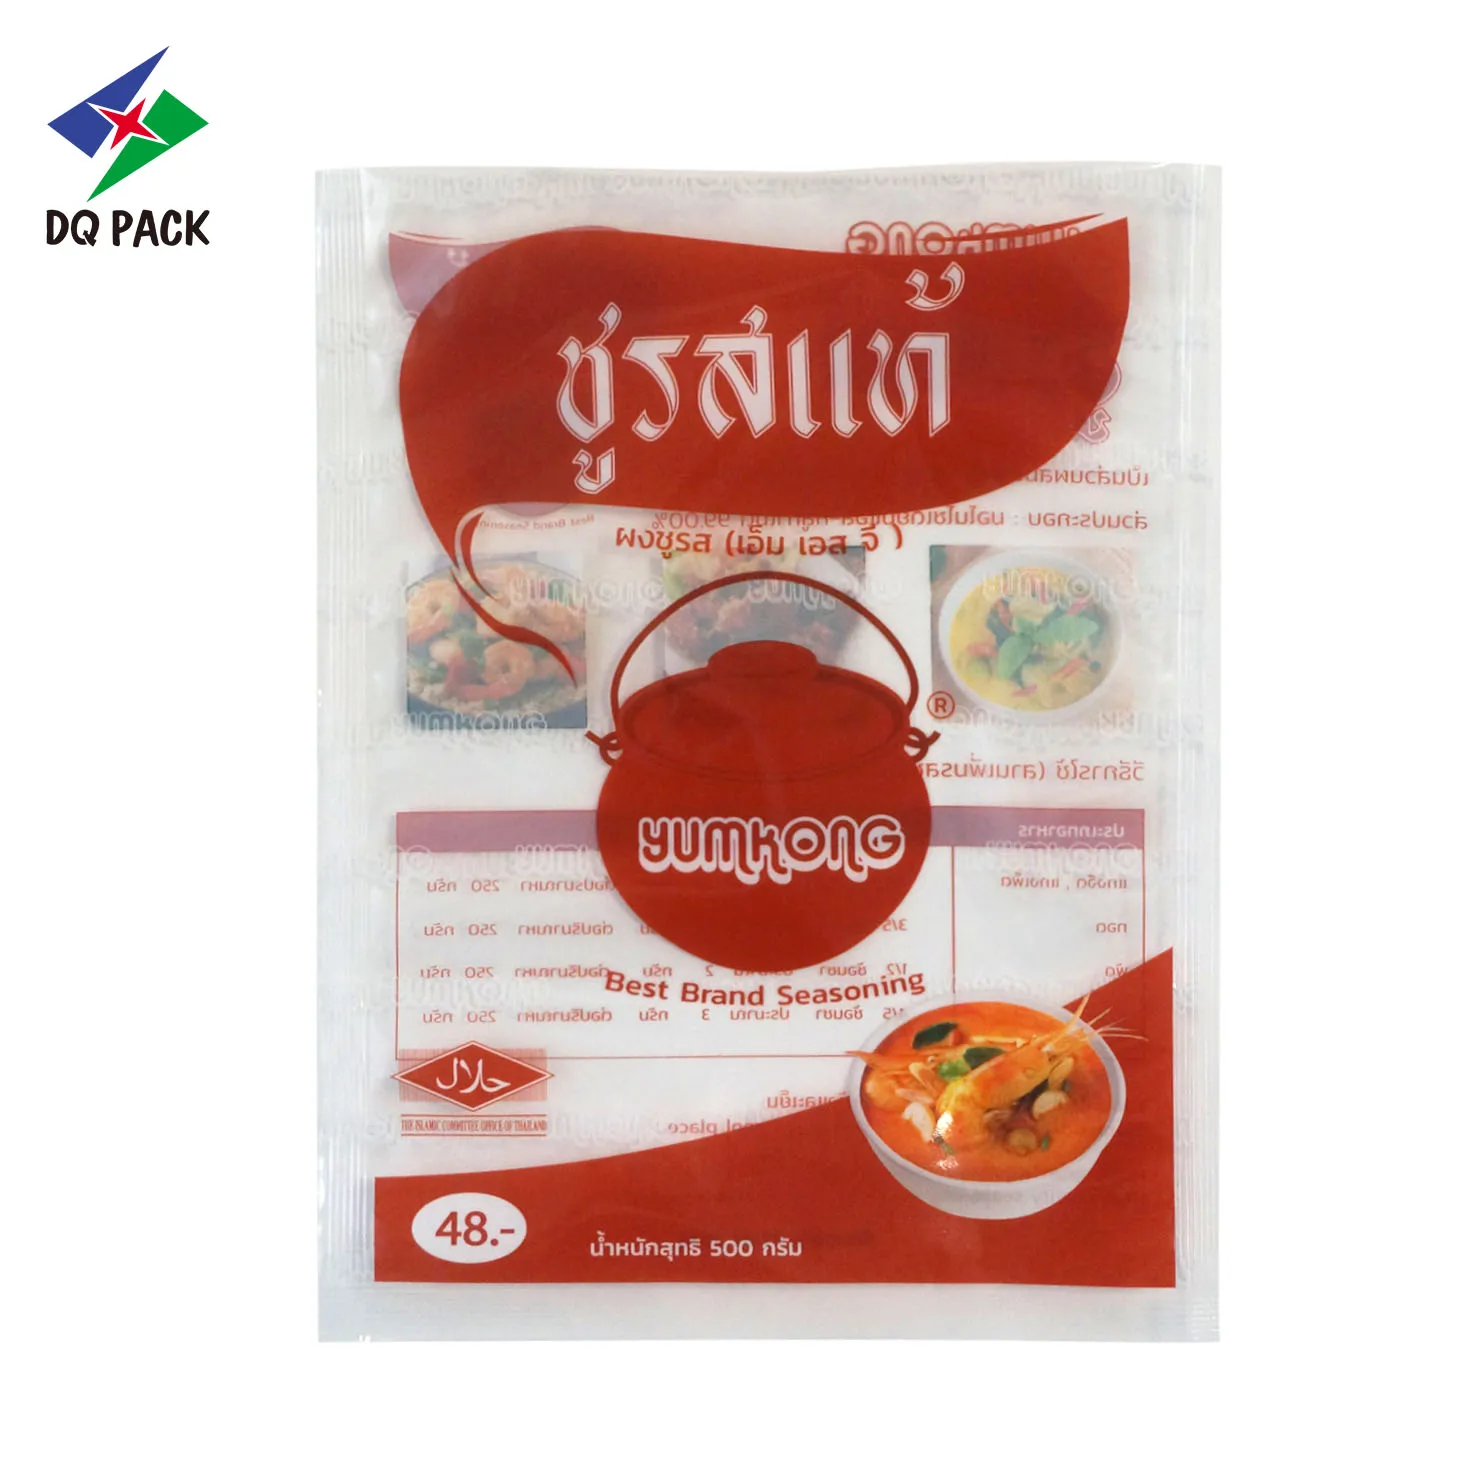 DQ PACK Flexible packaging plastic special shape pouch for food